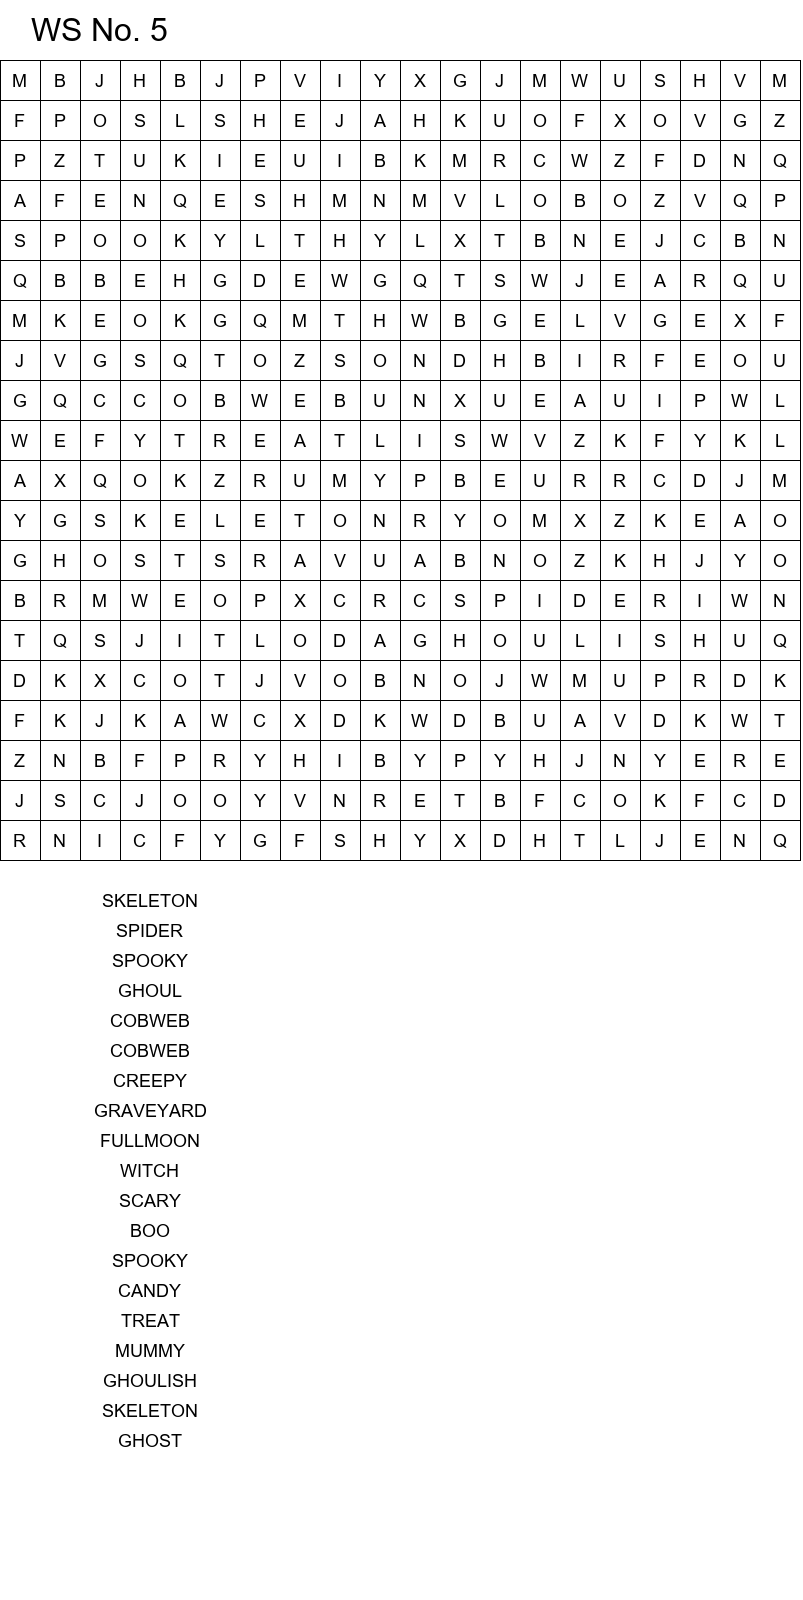 Free online Halloween word search puzzles size 20x20 No 5